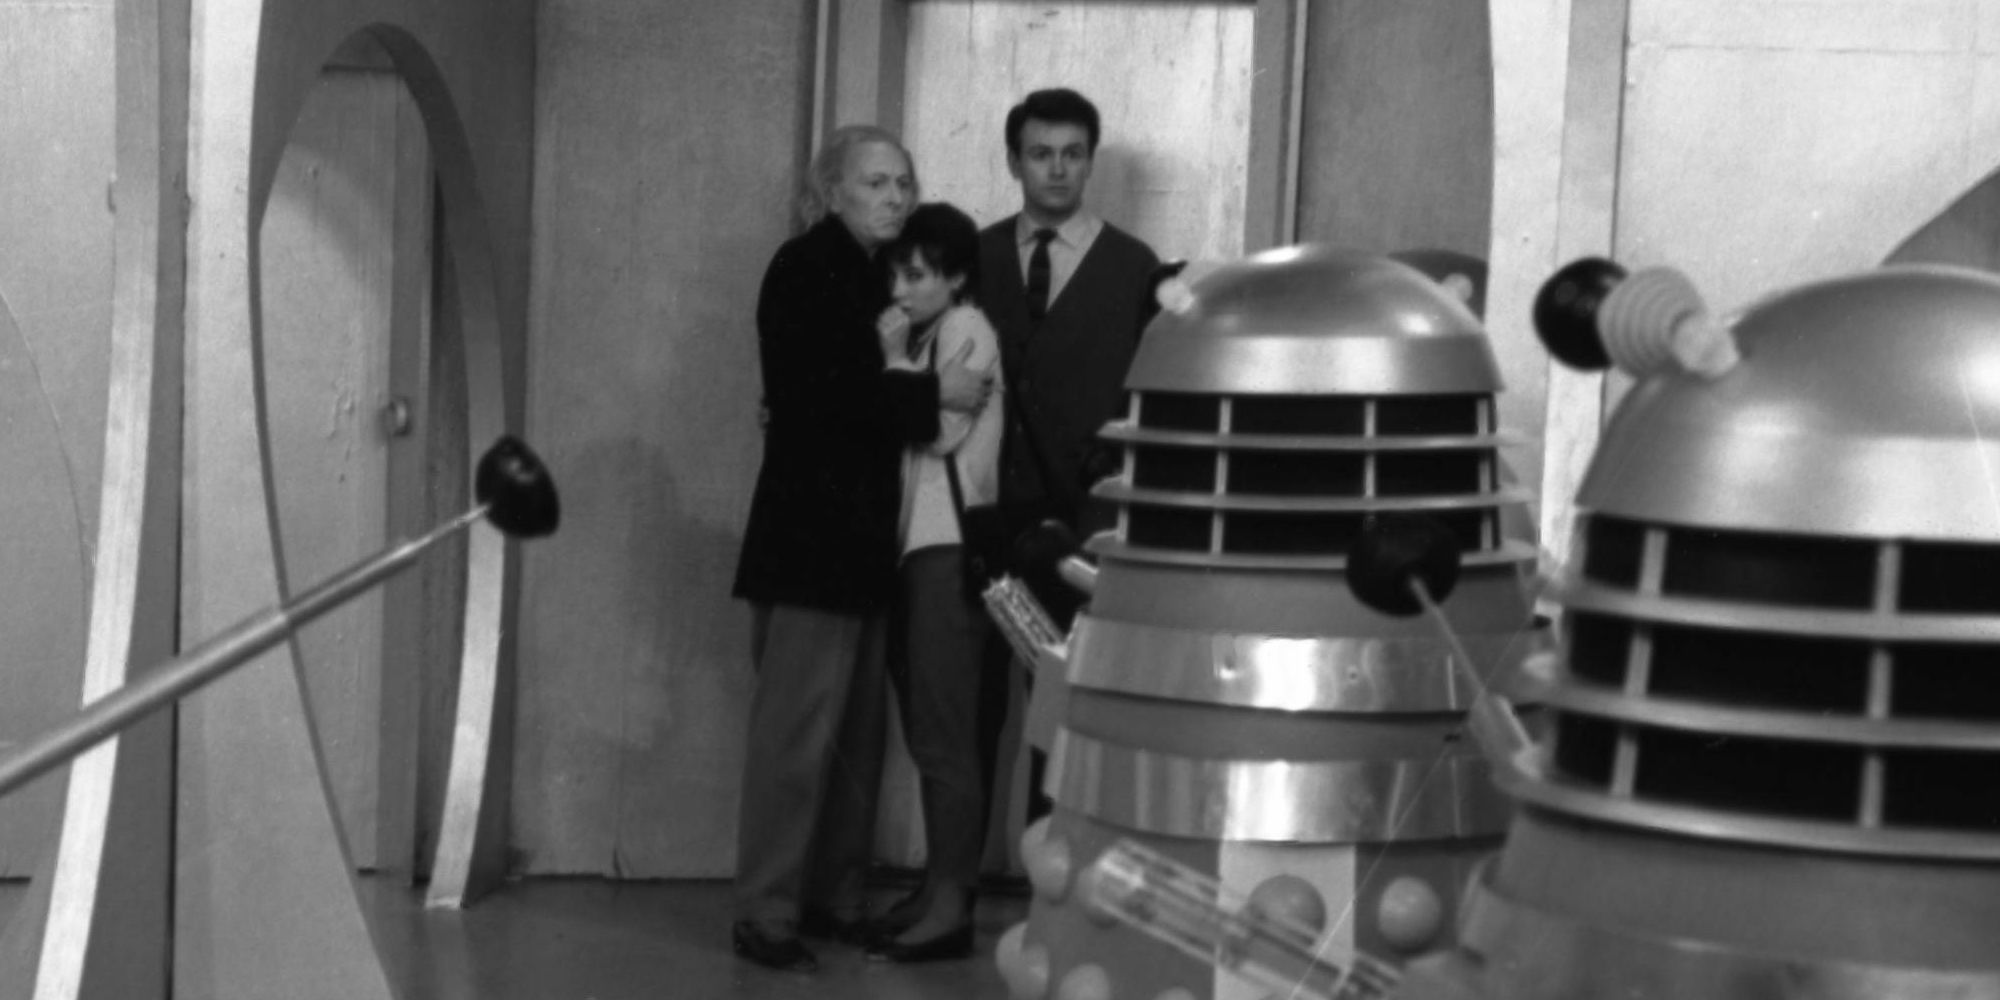 Doctor Who The Daleks William Hartnell Carole Ann Ford and William Russell as the First Doctor Susan and Ian